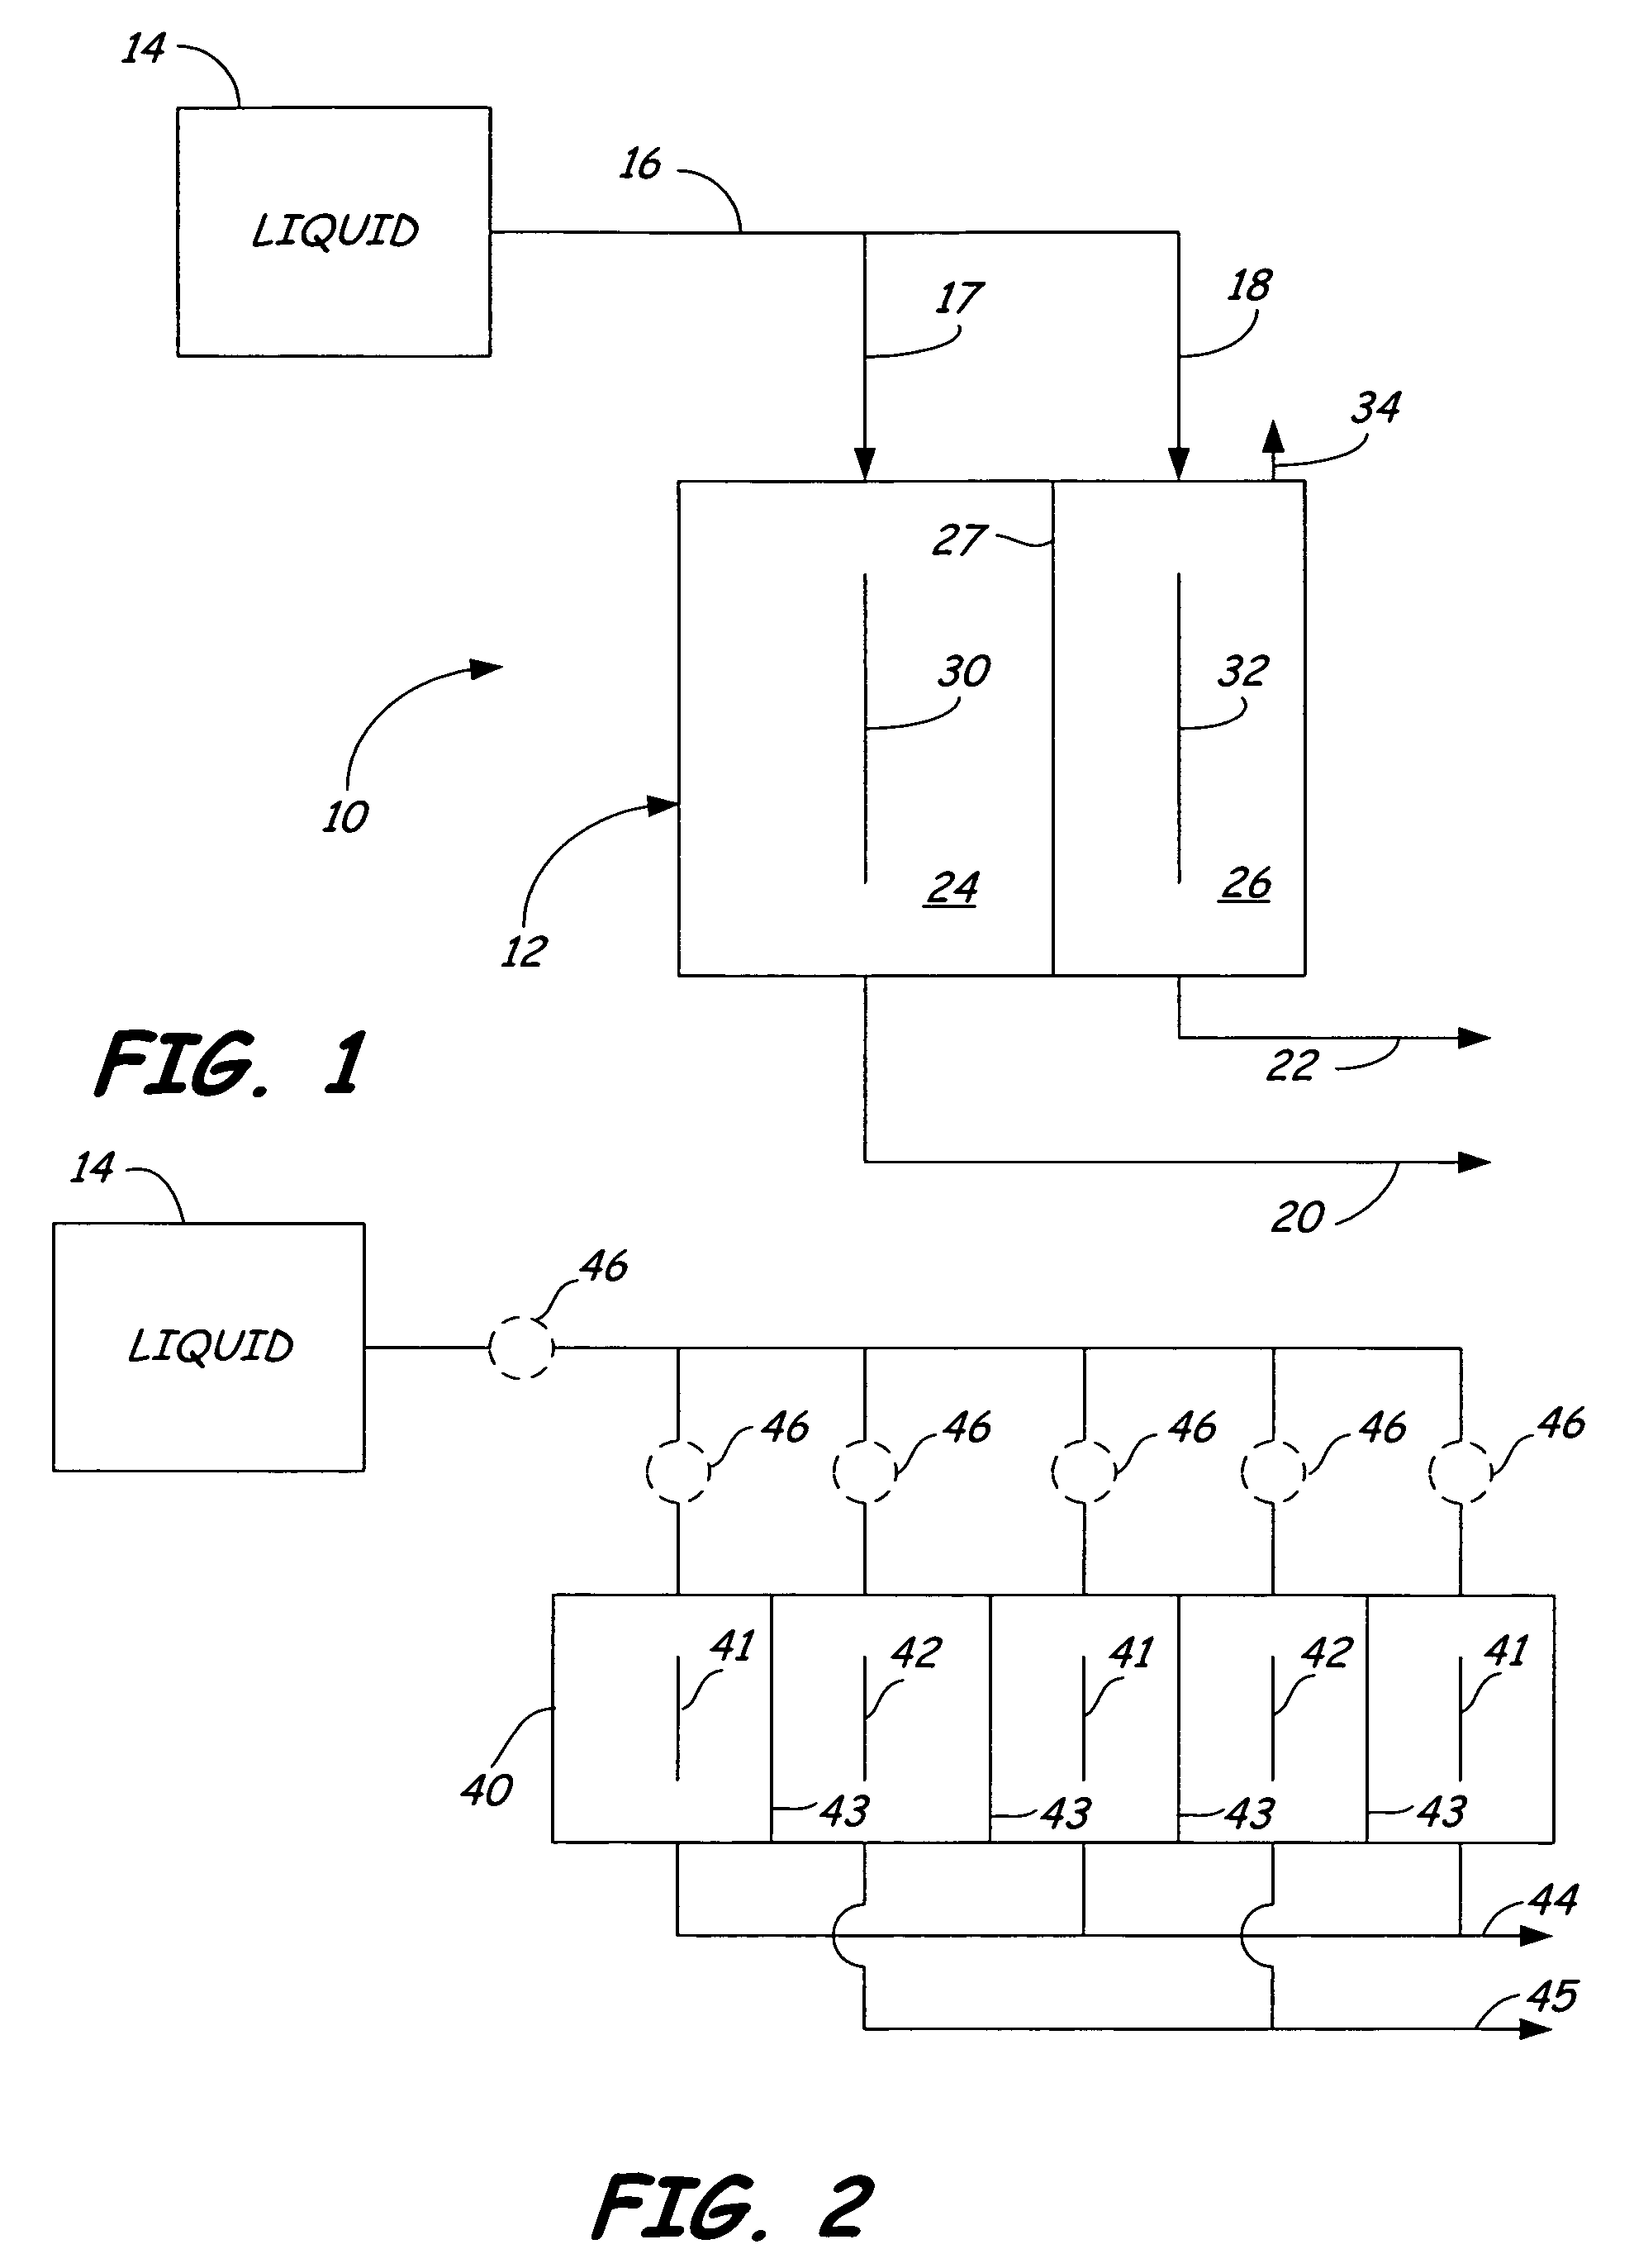 Method of producing a sparged cleaning liquid onboard a mobile surface cleaner